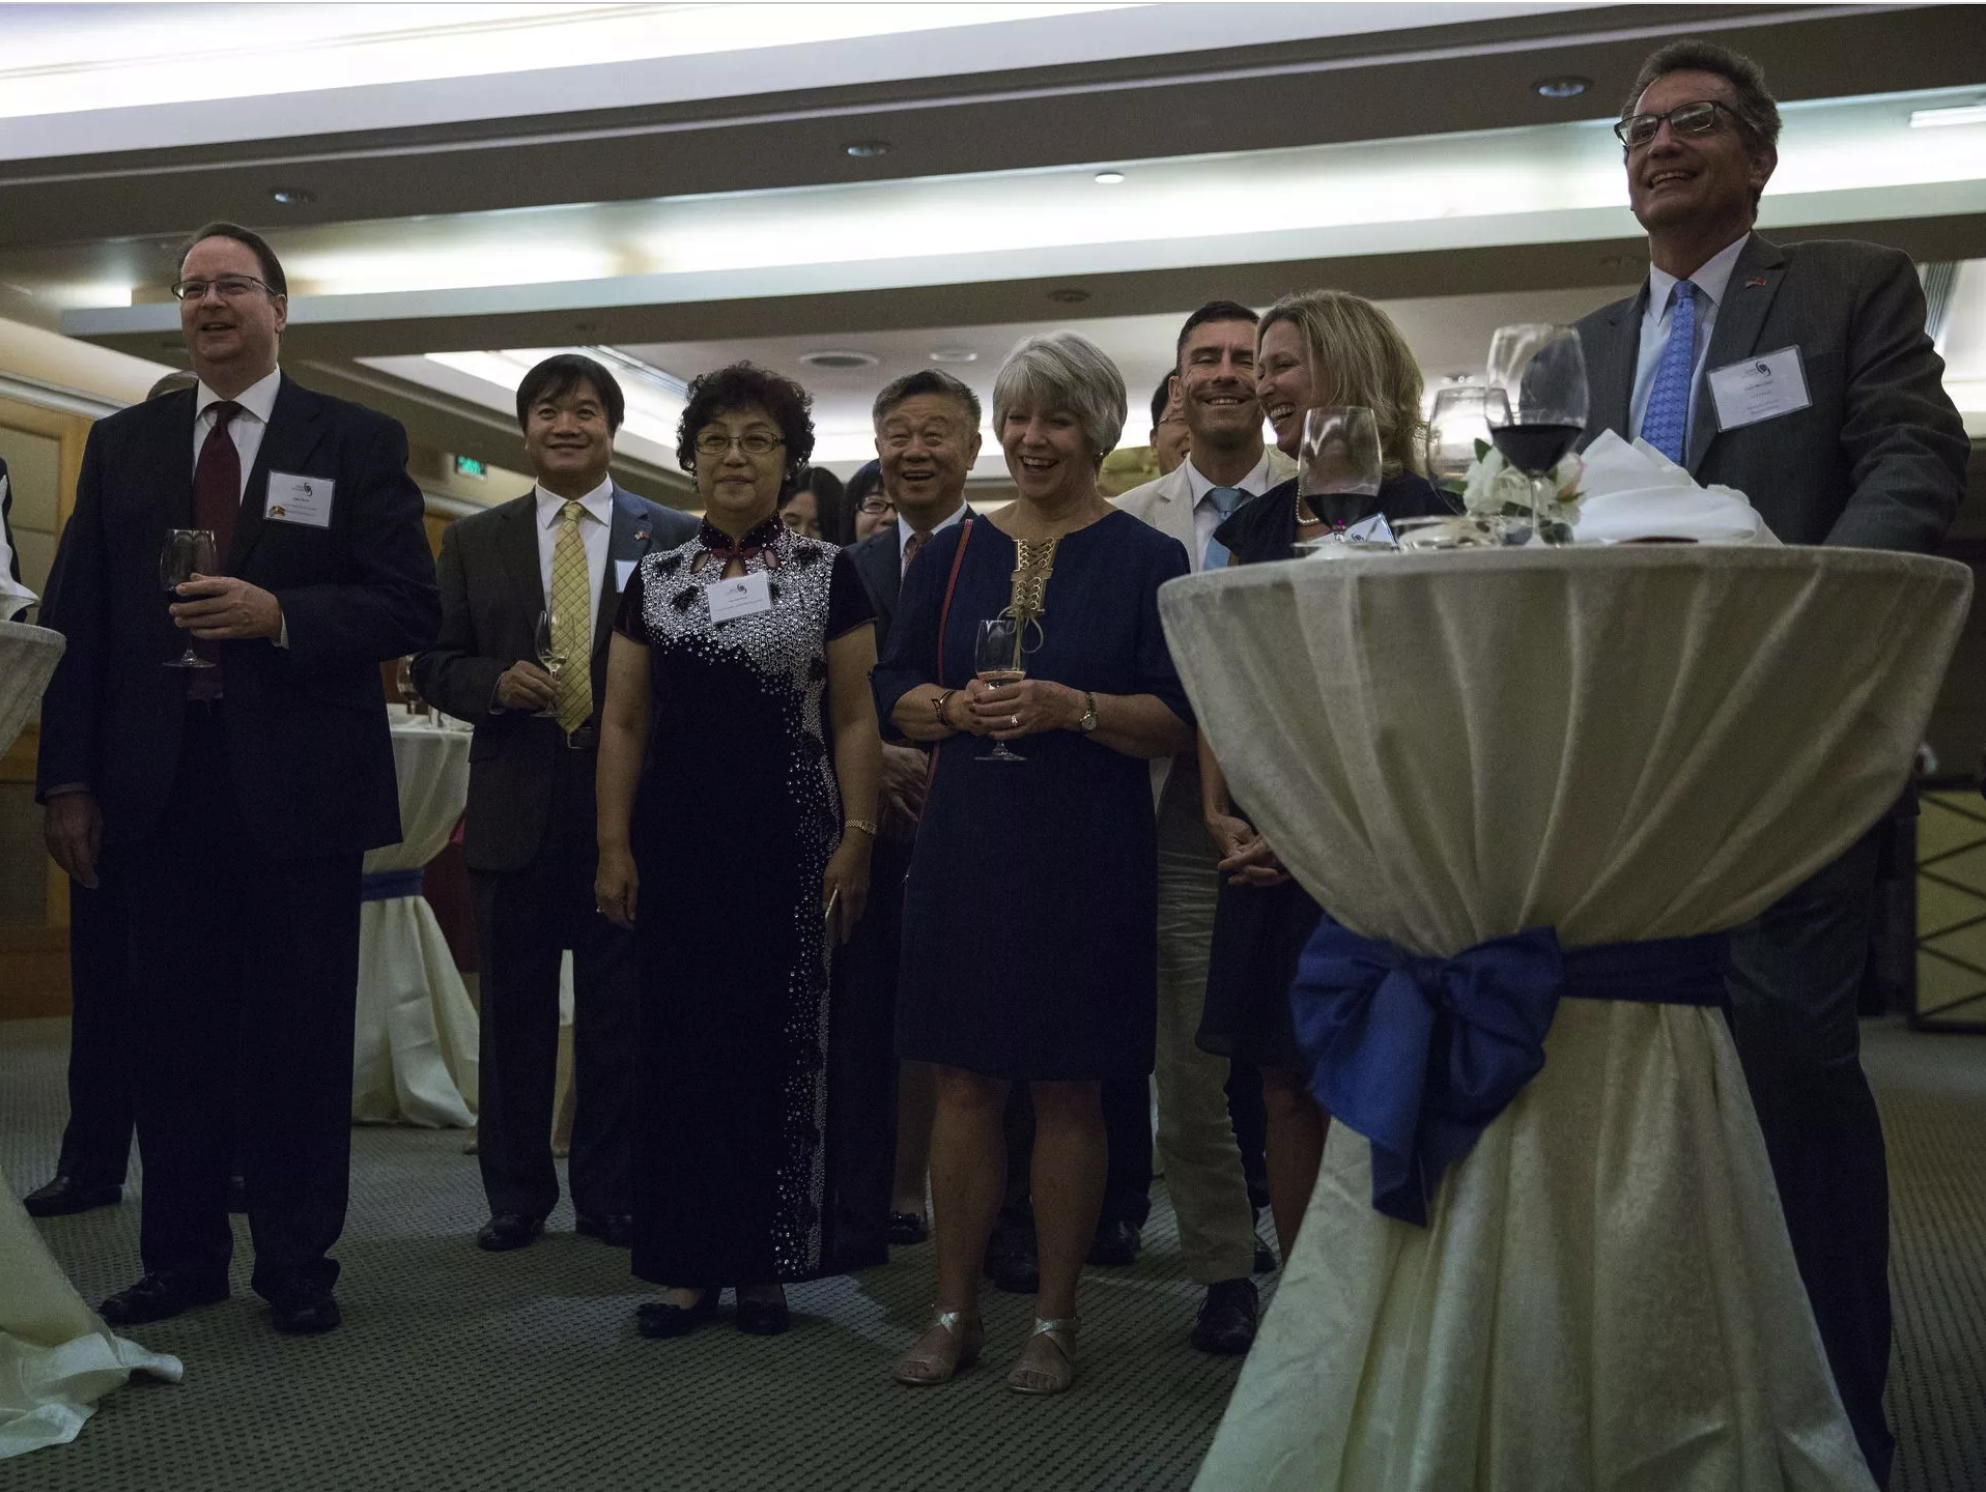 Iowans visiting and living in China attend a reception hosted by the Iowa Sister States organization on Wednesday, Sept. 20, 2017, in Beijing, China.  Image by Kelsey Kremer. China, 2017. 